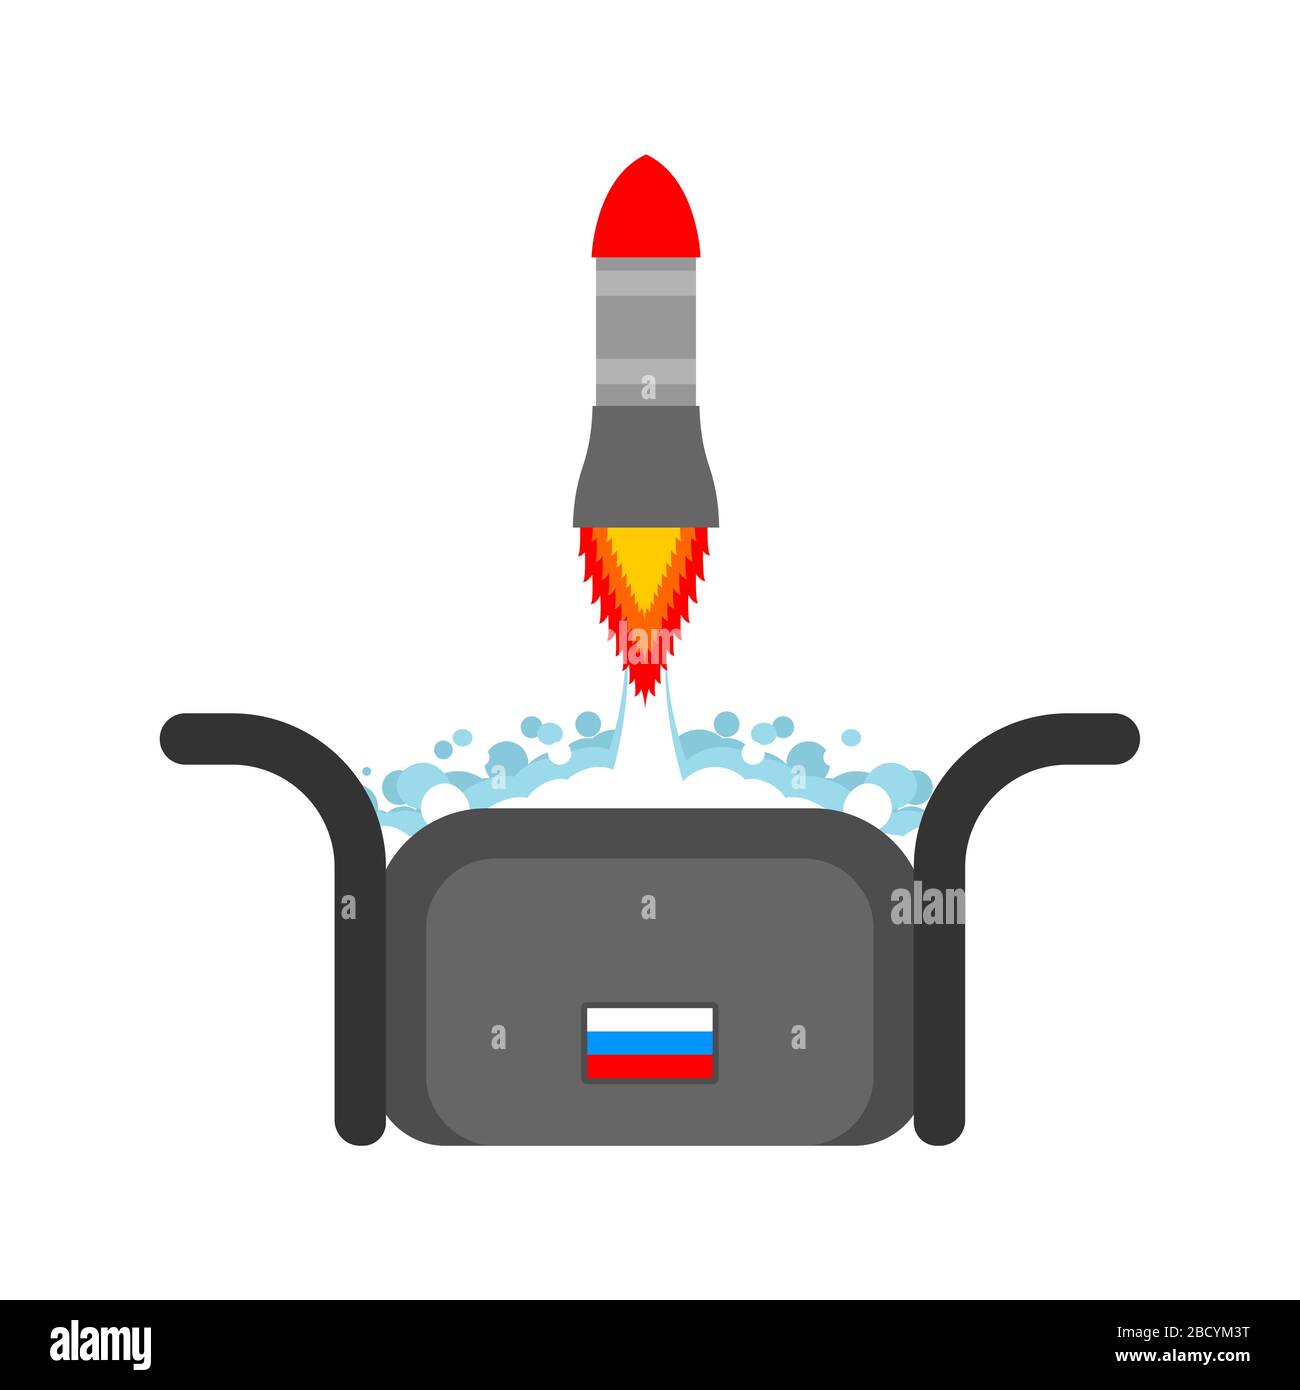 Missile launch from russian winter cap. Secret weapon of Russia Flying bomb Stock Vector